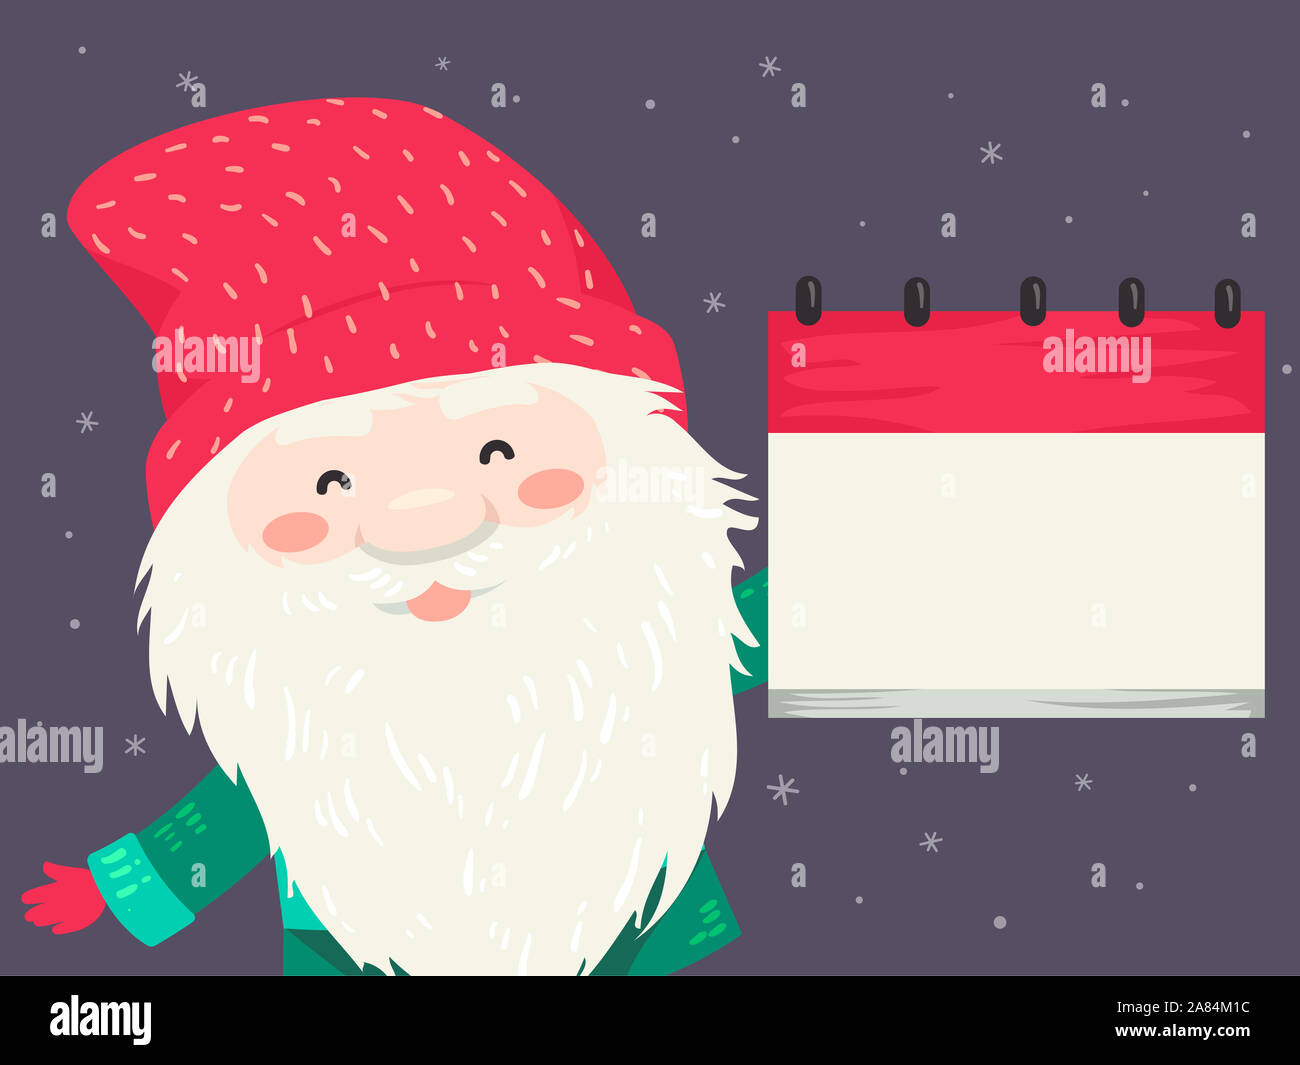 Illustration of an Icelandic Yule Lad with Long White Beard and Mustache Wearing Red Bonnet Holding a Blank Calendar Stock Photo